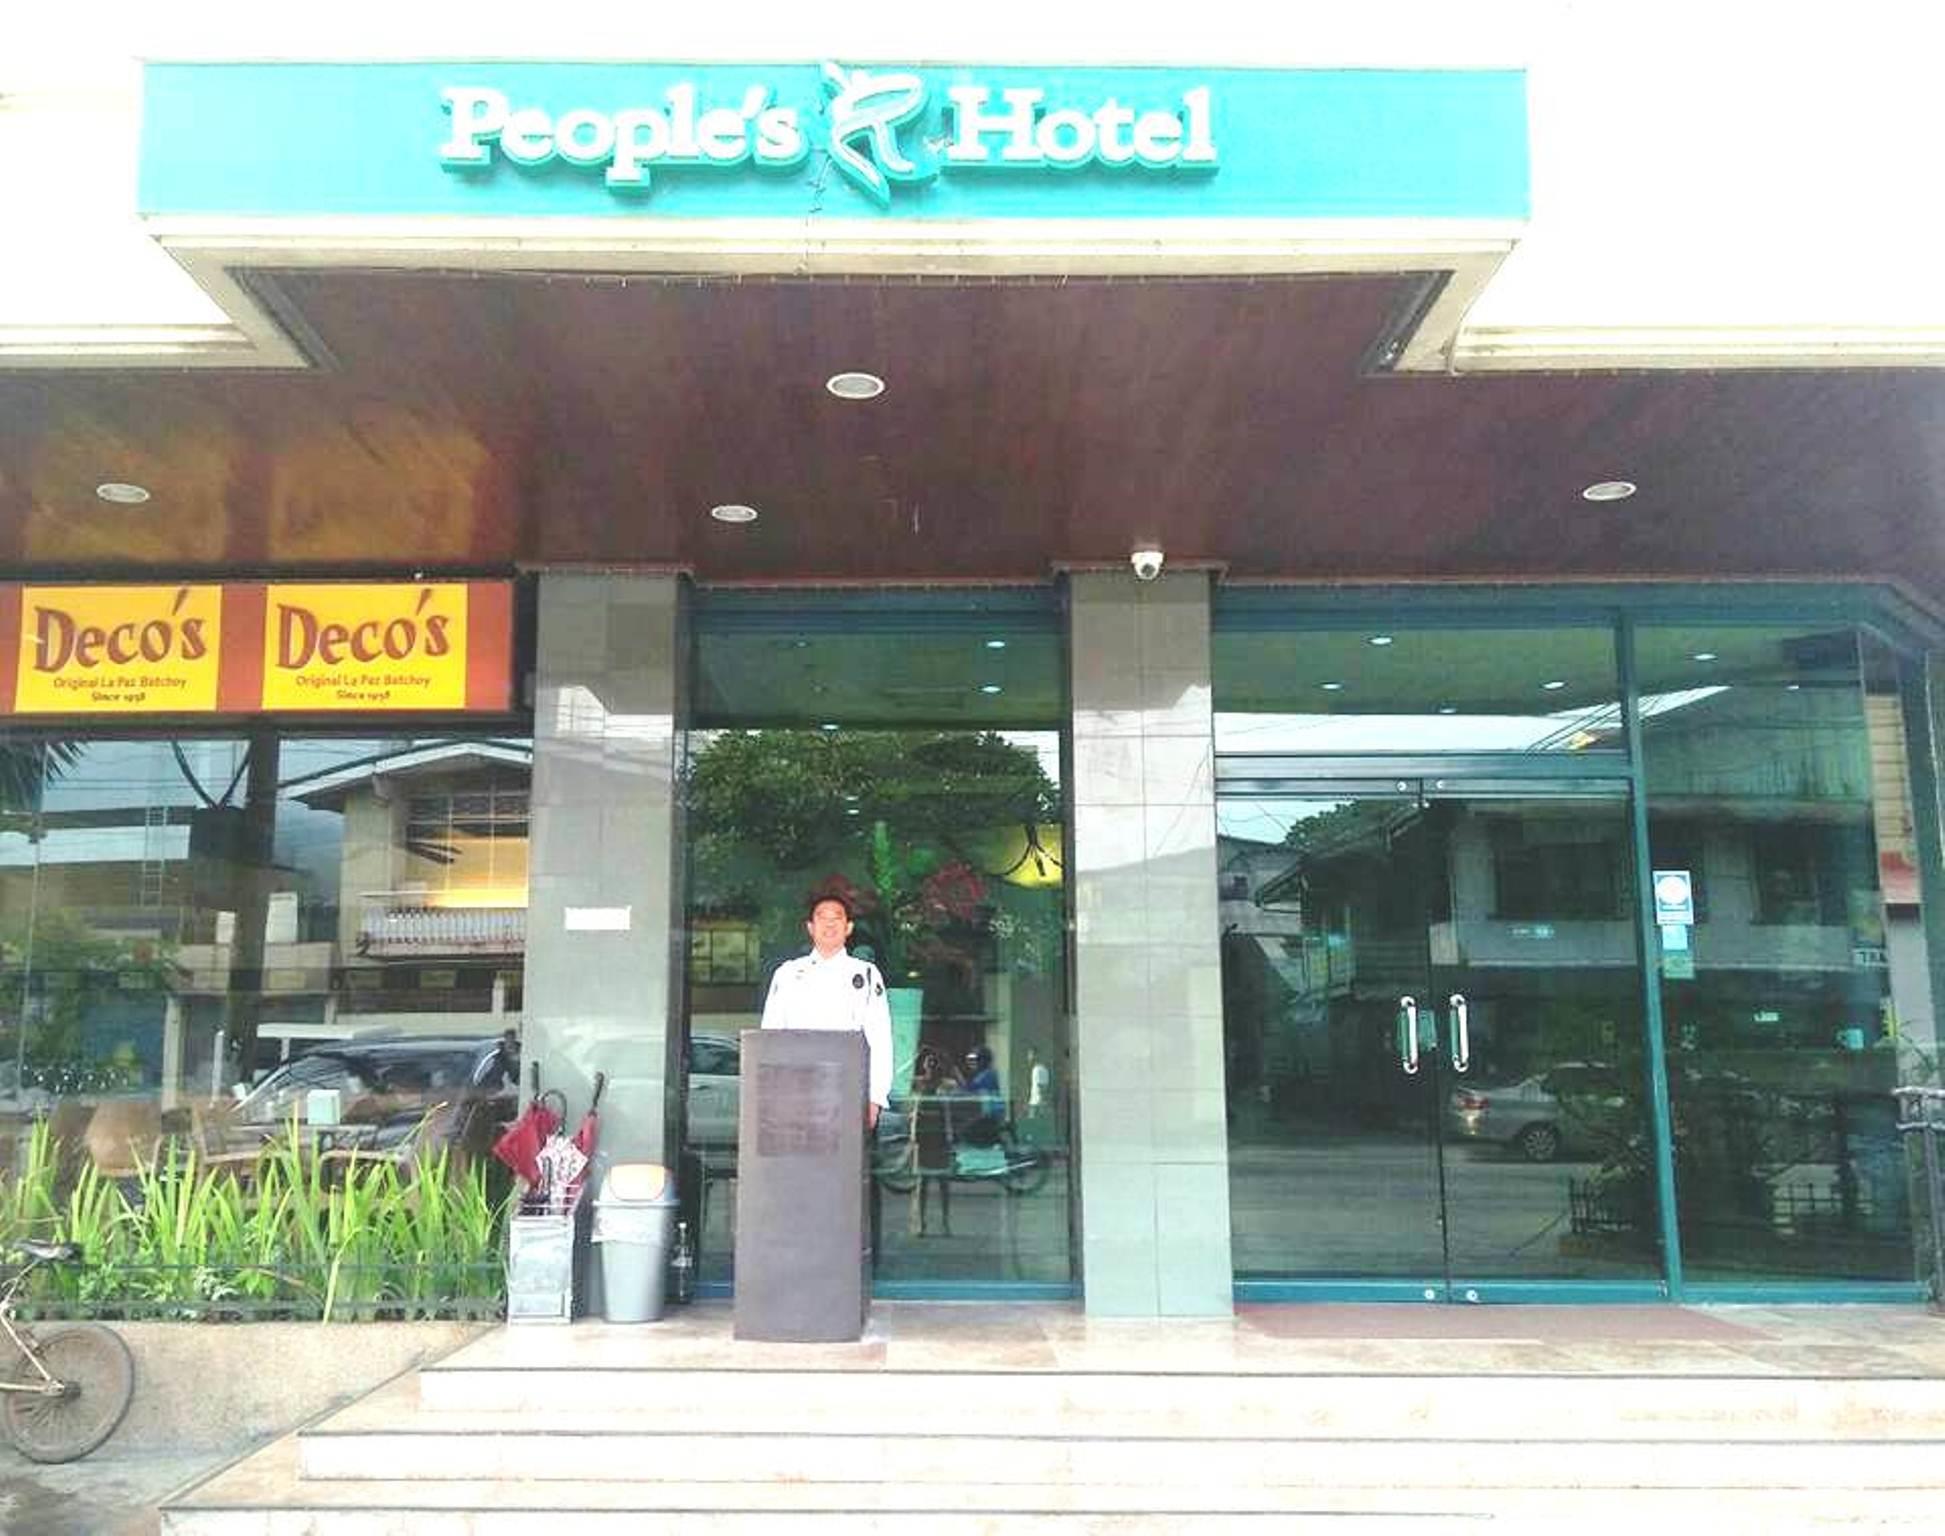 People's Hotel image 1